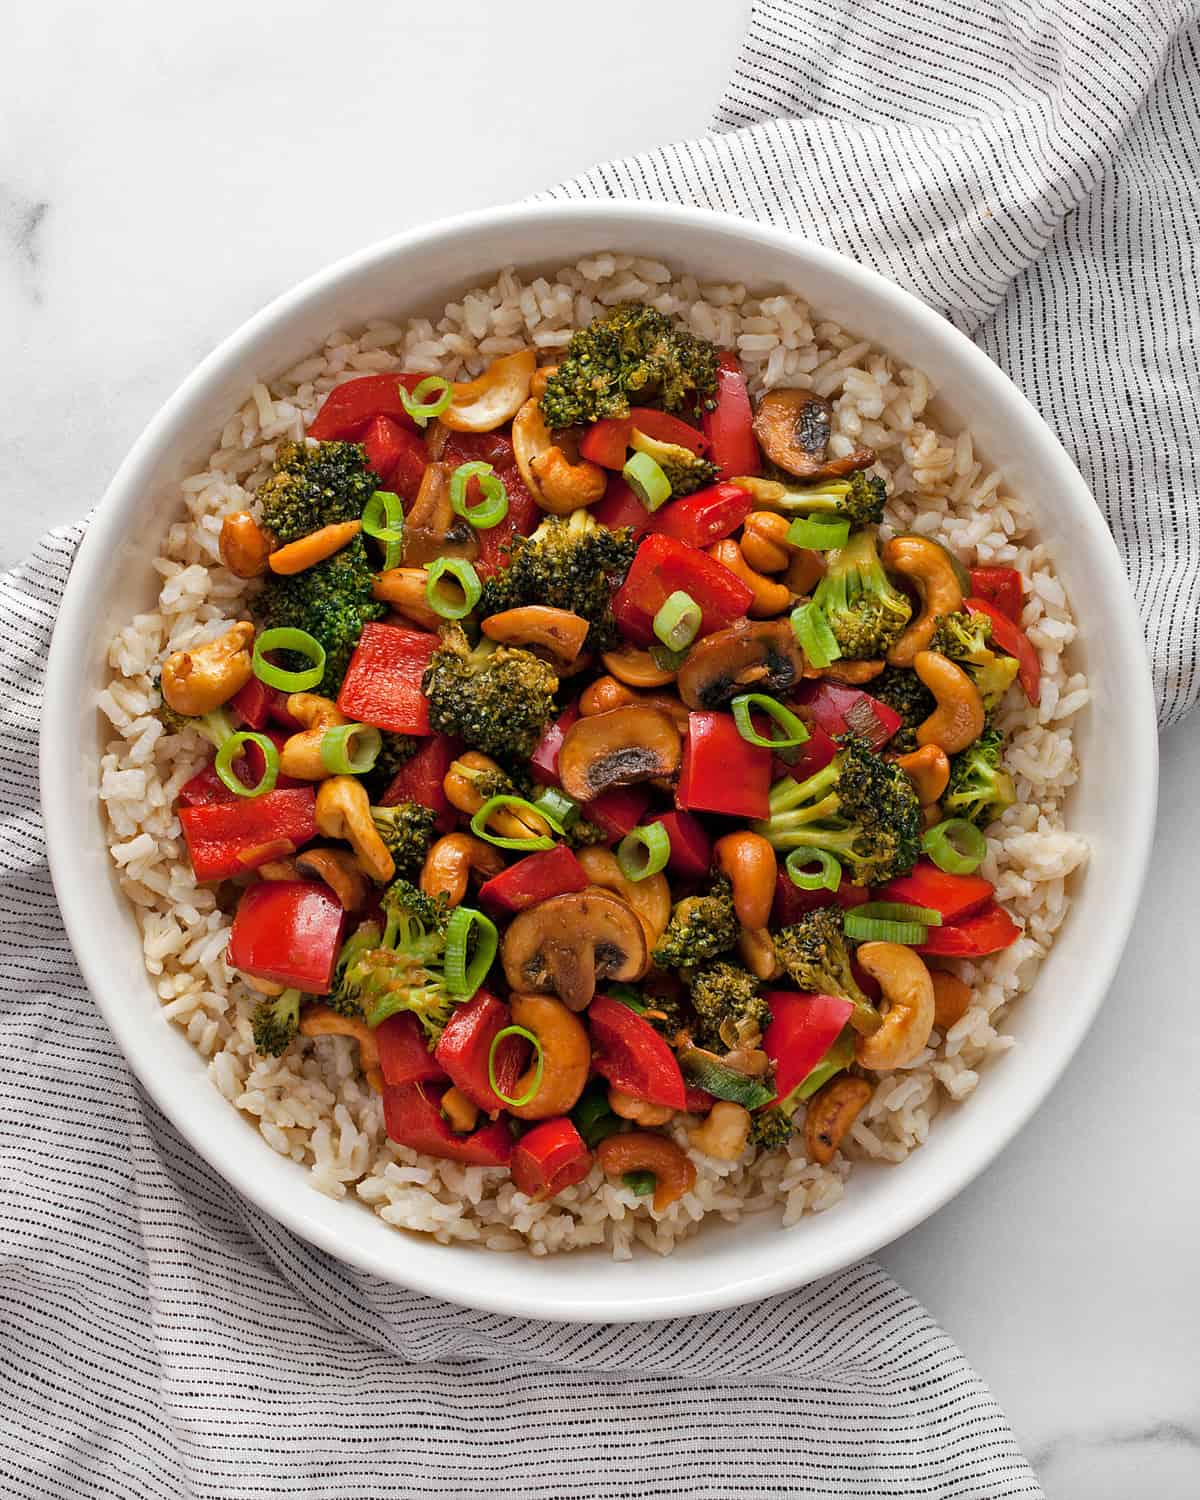 Veggie stir-fry with cashews and rice in a bowl.